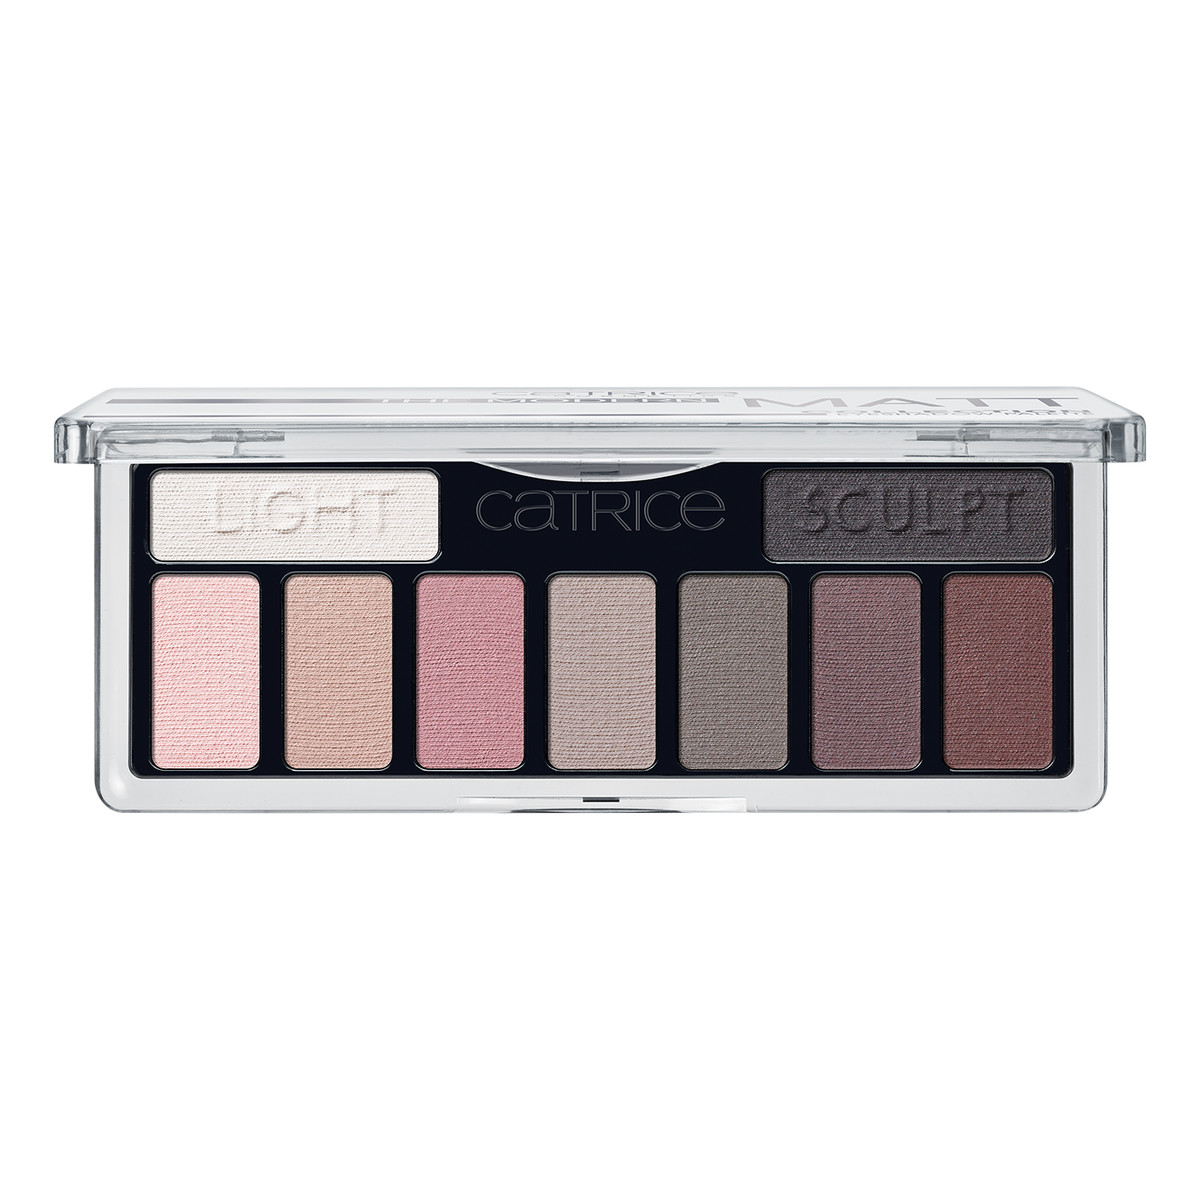 Catrice The Modern Matt Collection Eyeshadow Palette Paletka Pudrowych Cieni